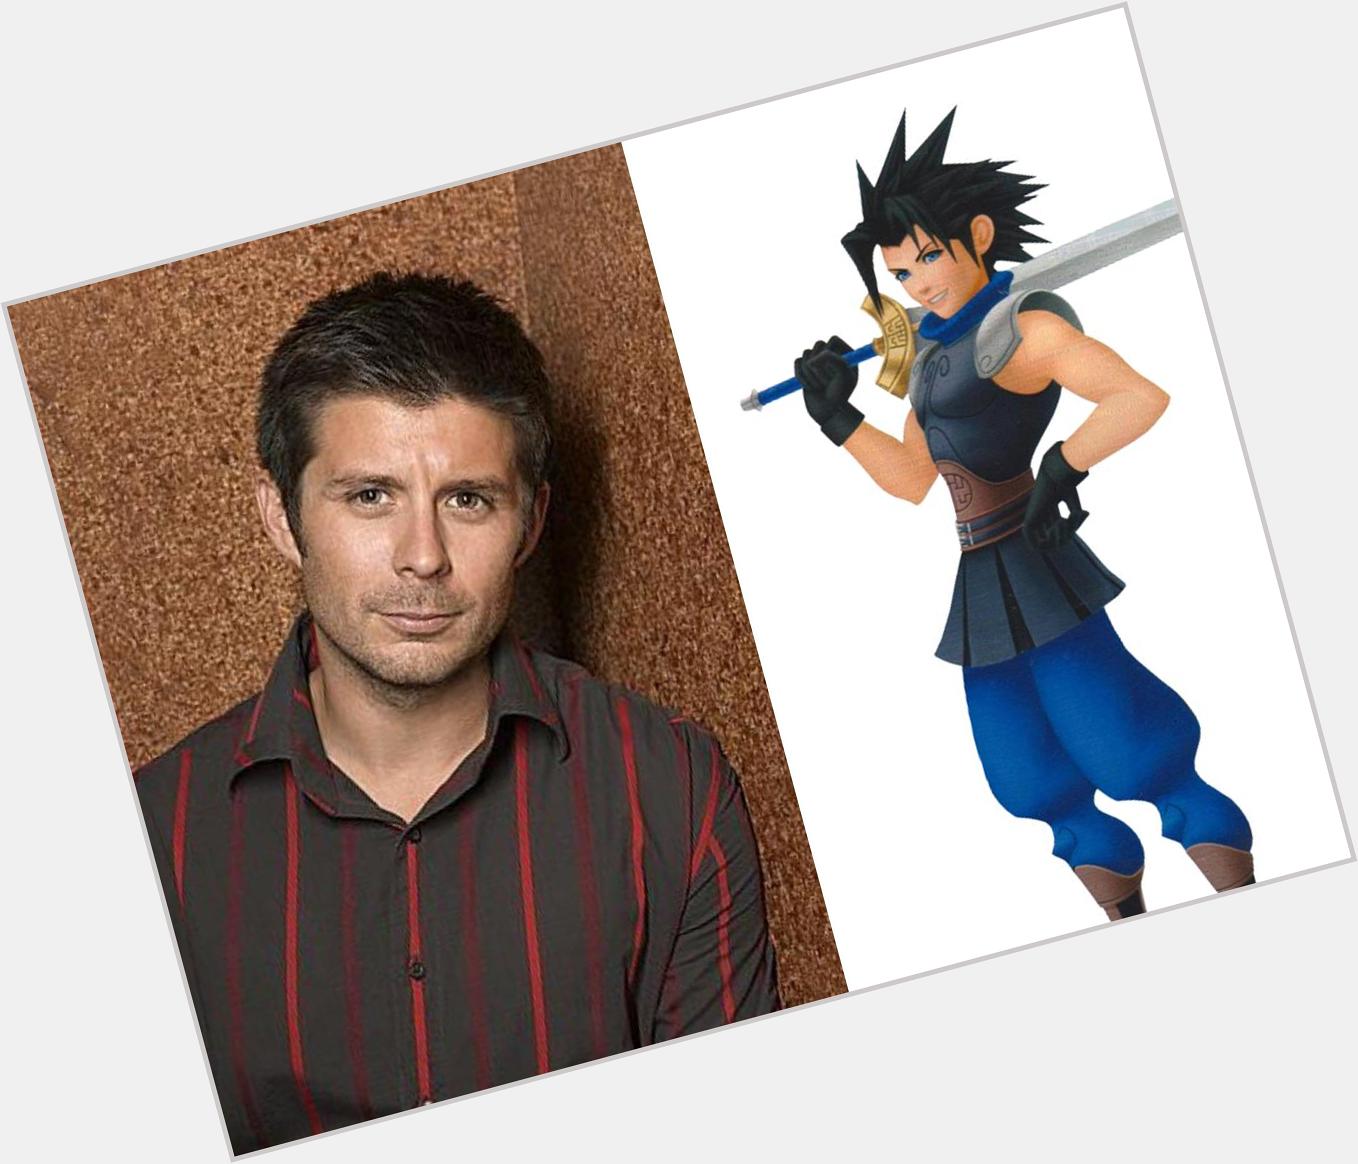  Happy 43rd Birthday to Rick Gomez (born June 1, 1972) who voices Zack Fair in Birth by Sleep! 